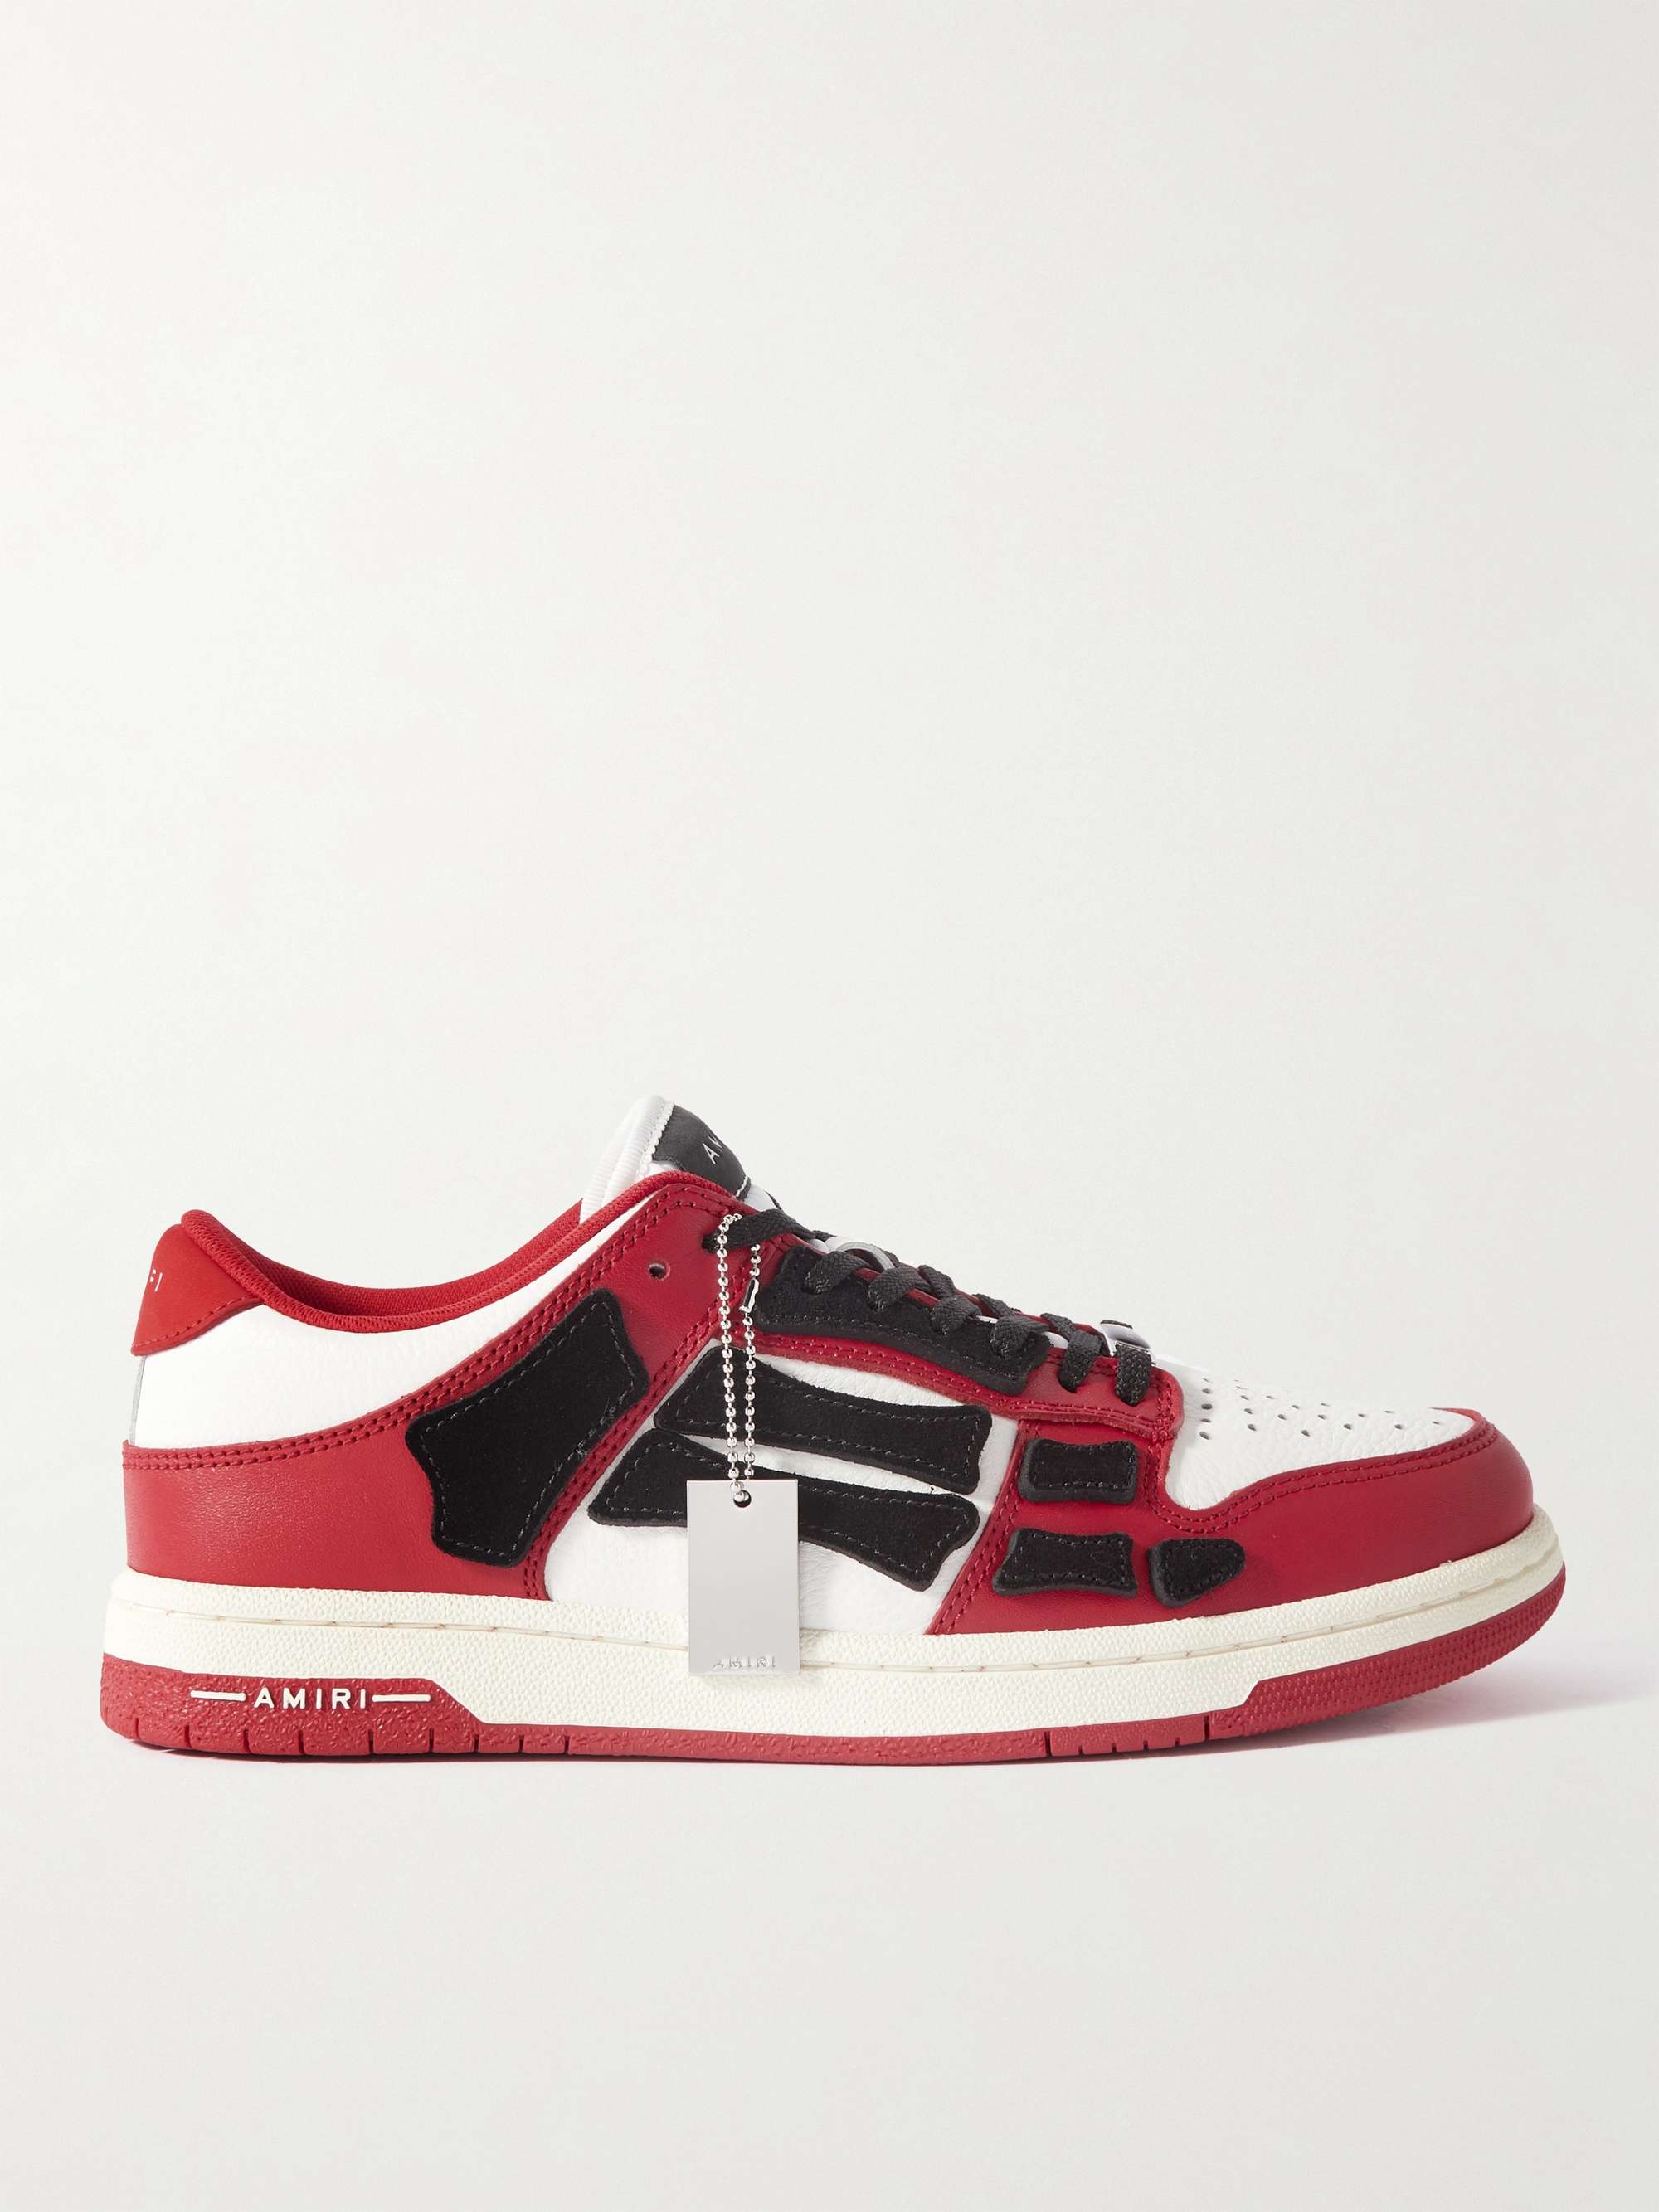 Red Skel-Top Colour-Block Leather and Suede Sneakers | AMIRI | MR PORTER